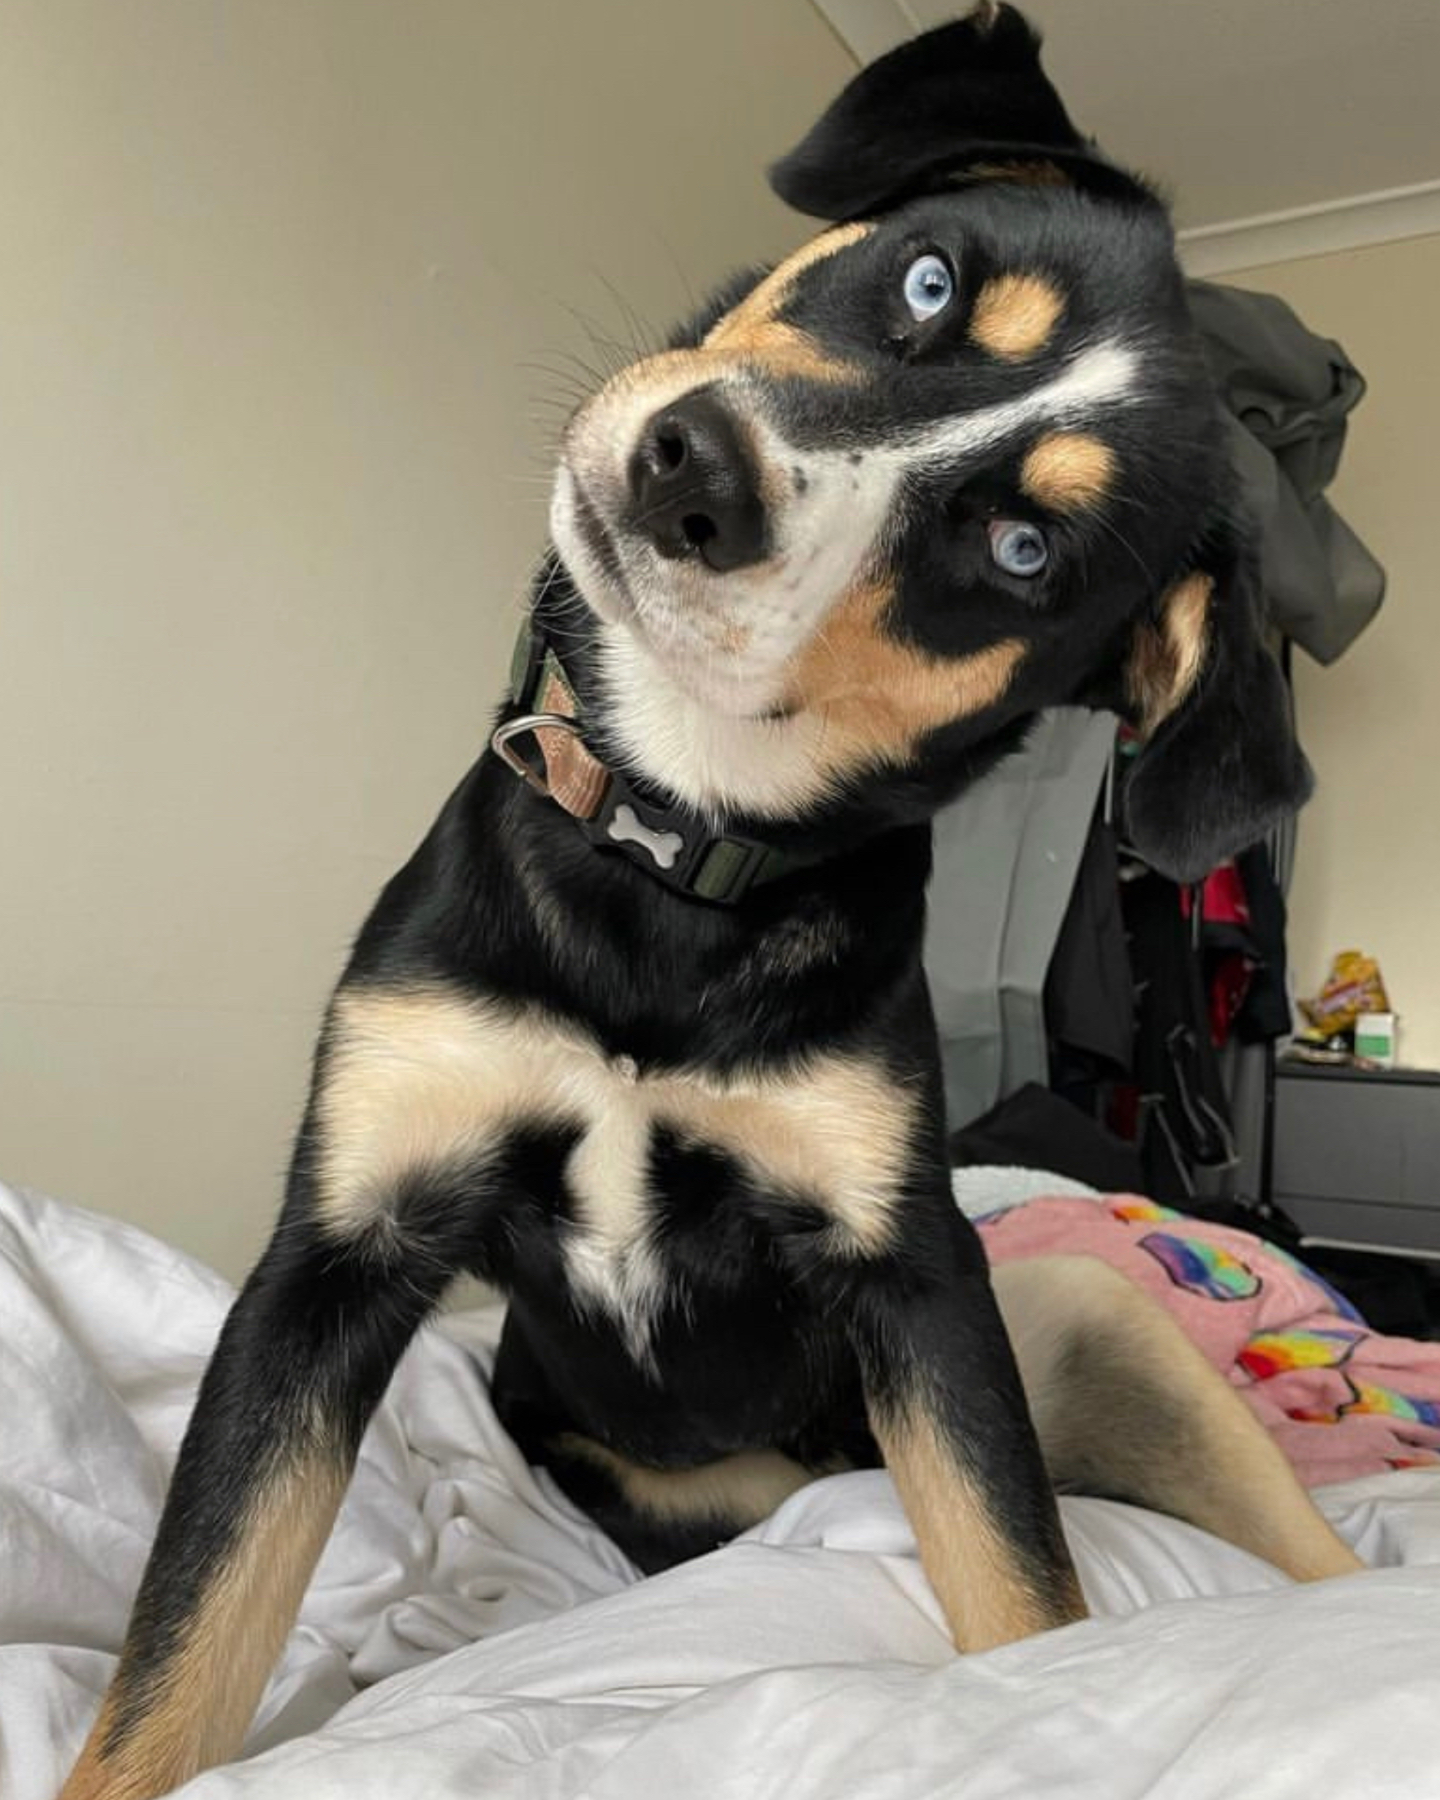 A Rottweiler Husky mix dog looking at his owner after taking a nap